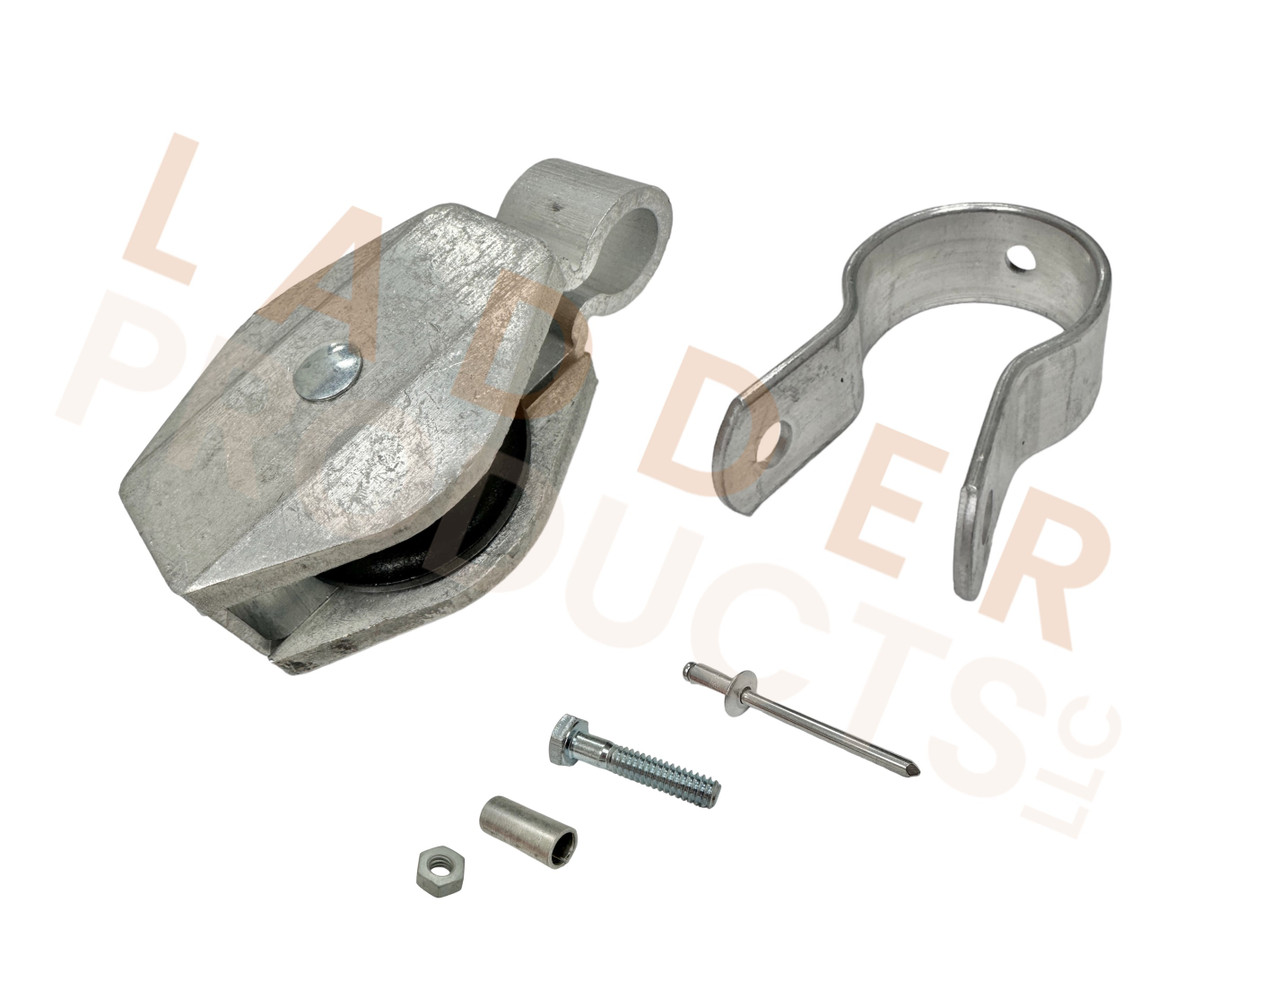 LadderProducts.com | Werner Extension Ladder Round Rung Replacement Pulley Assembly Kit 31-4.